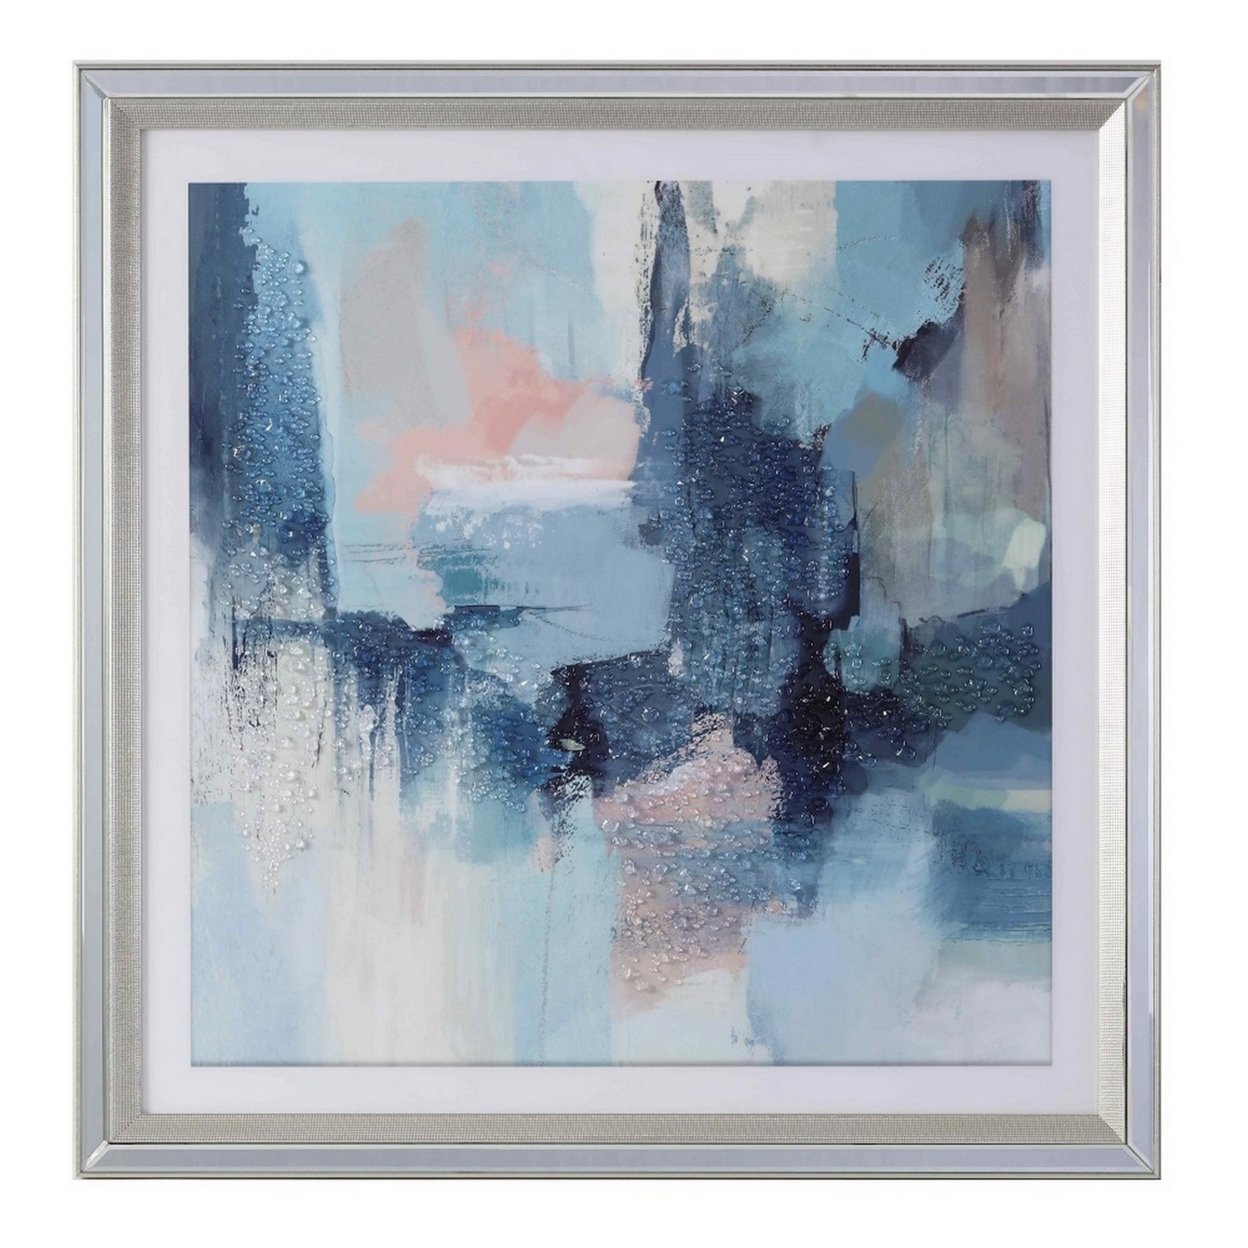 Wall Art With Acrylic Frame And Abstract Design, Silver And Blue- Saltoro Sherpi